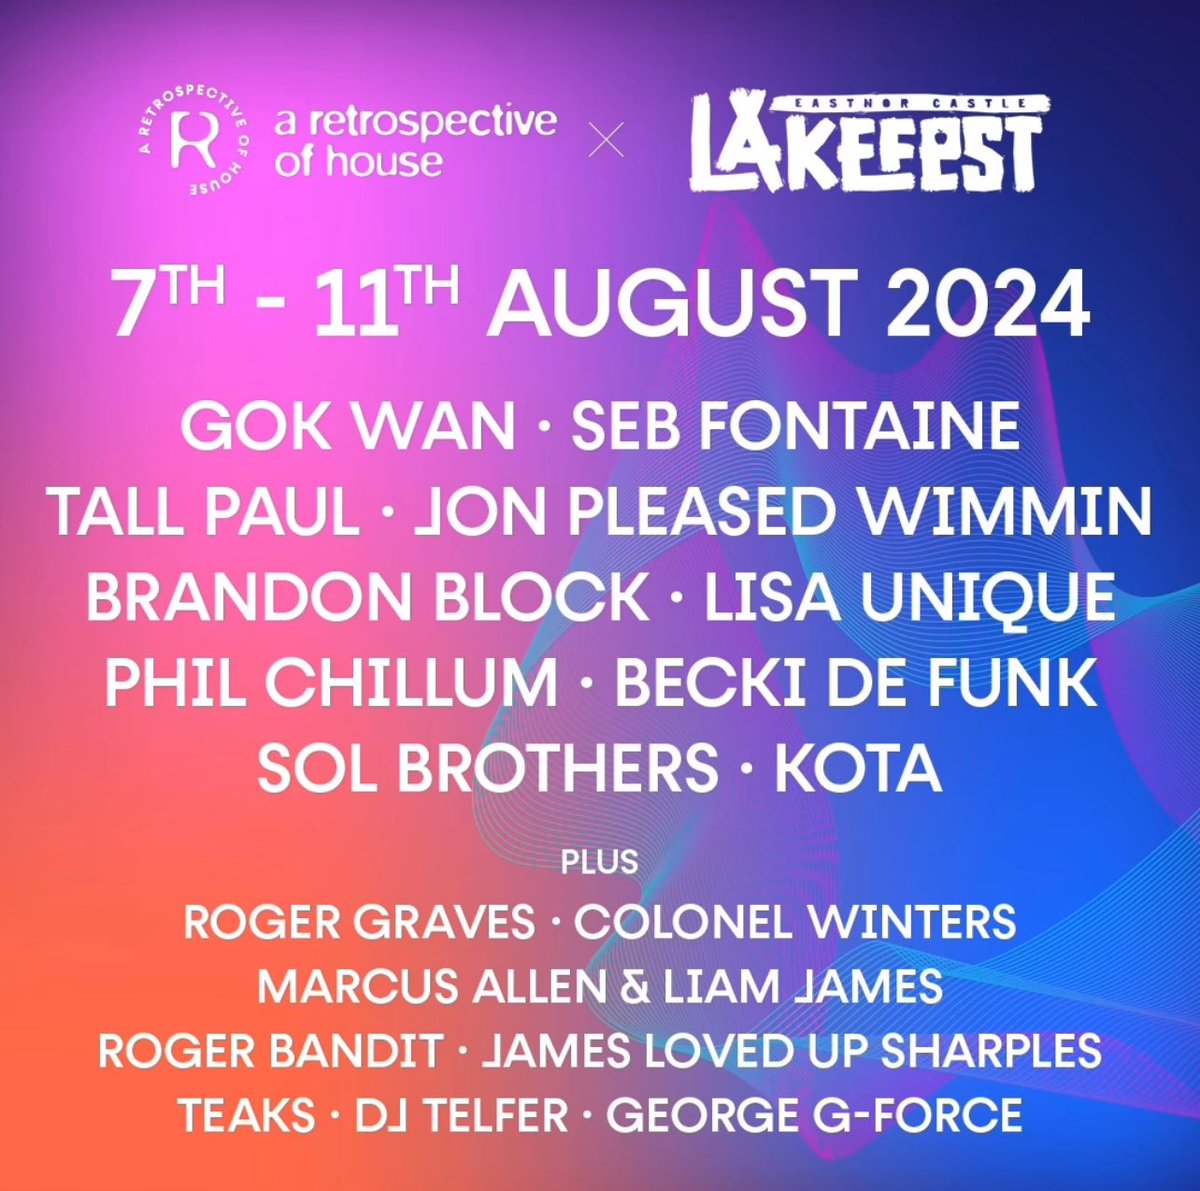 Retrospective of house at LAKEFEST, bigger and better than ever before! 🎉🔥 It’ll be pumping late into the night, with classic dance tunes and the latest mashups/remixes! @therealgokwan will be there too!! 🤩 Lakefest.co.uk/buy-tickets